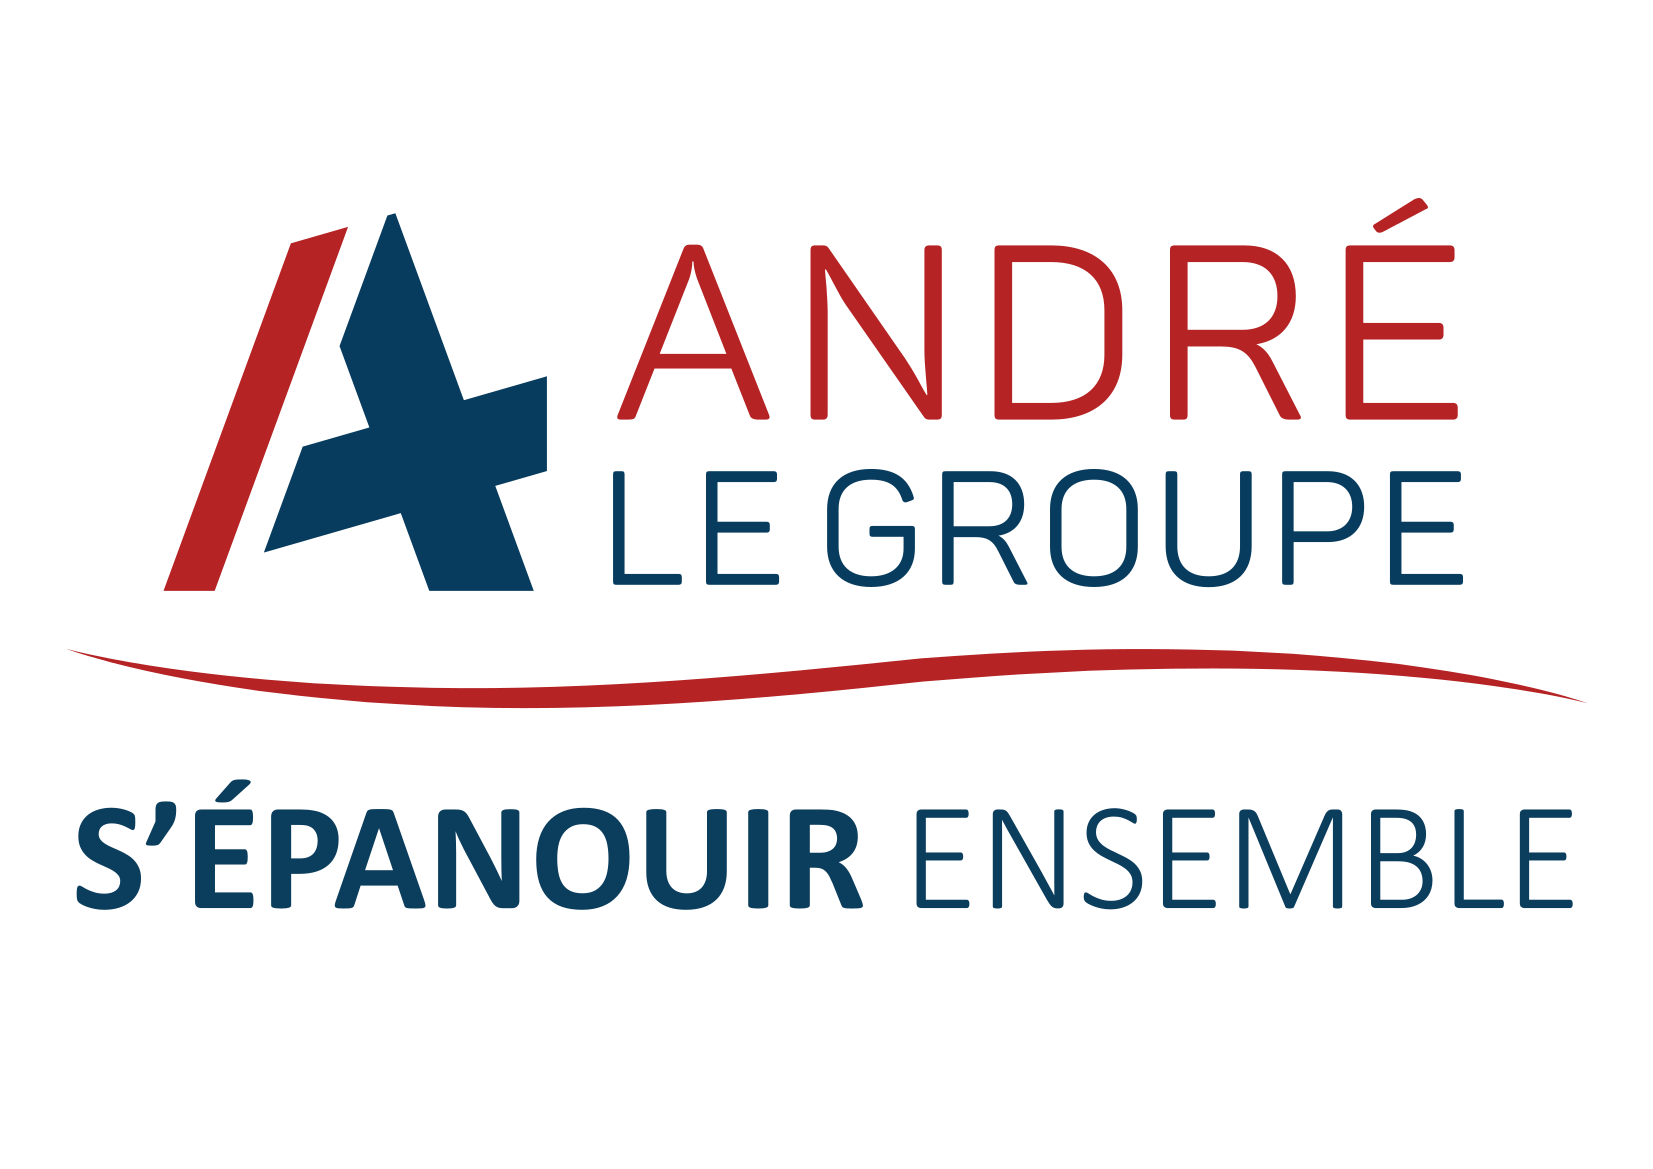 ANDRE LE GROUPE